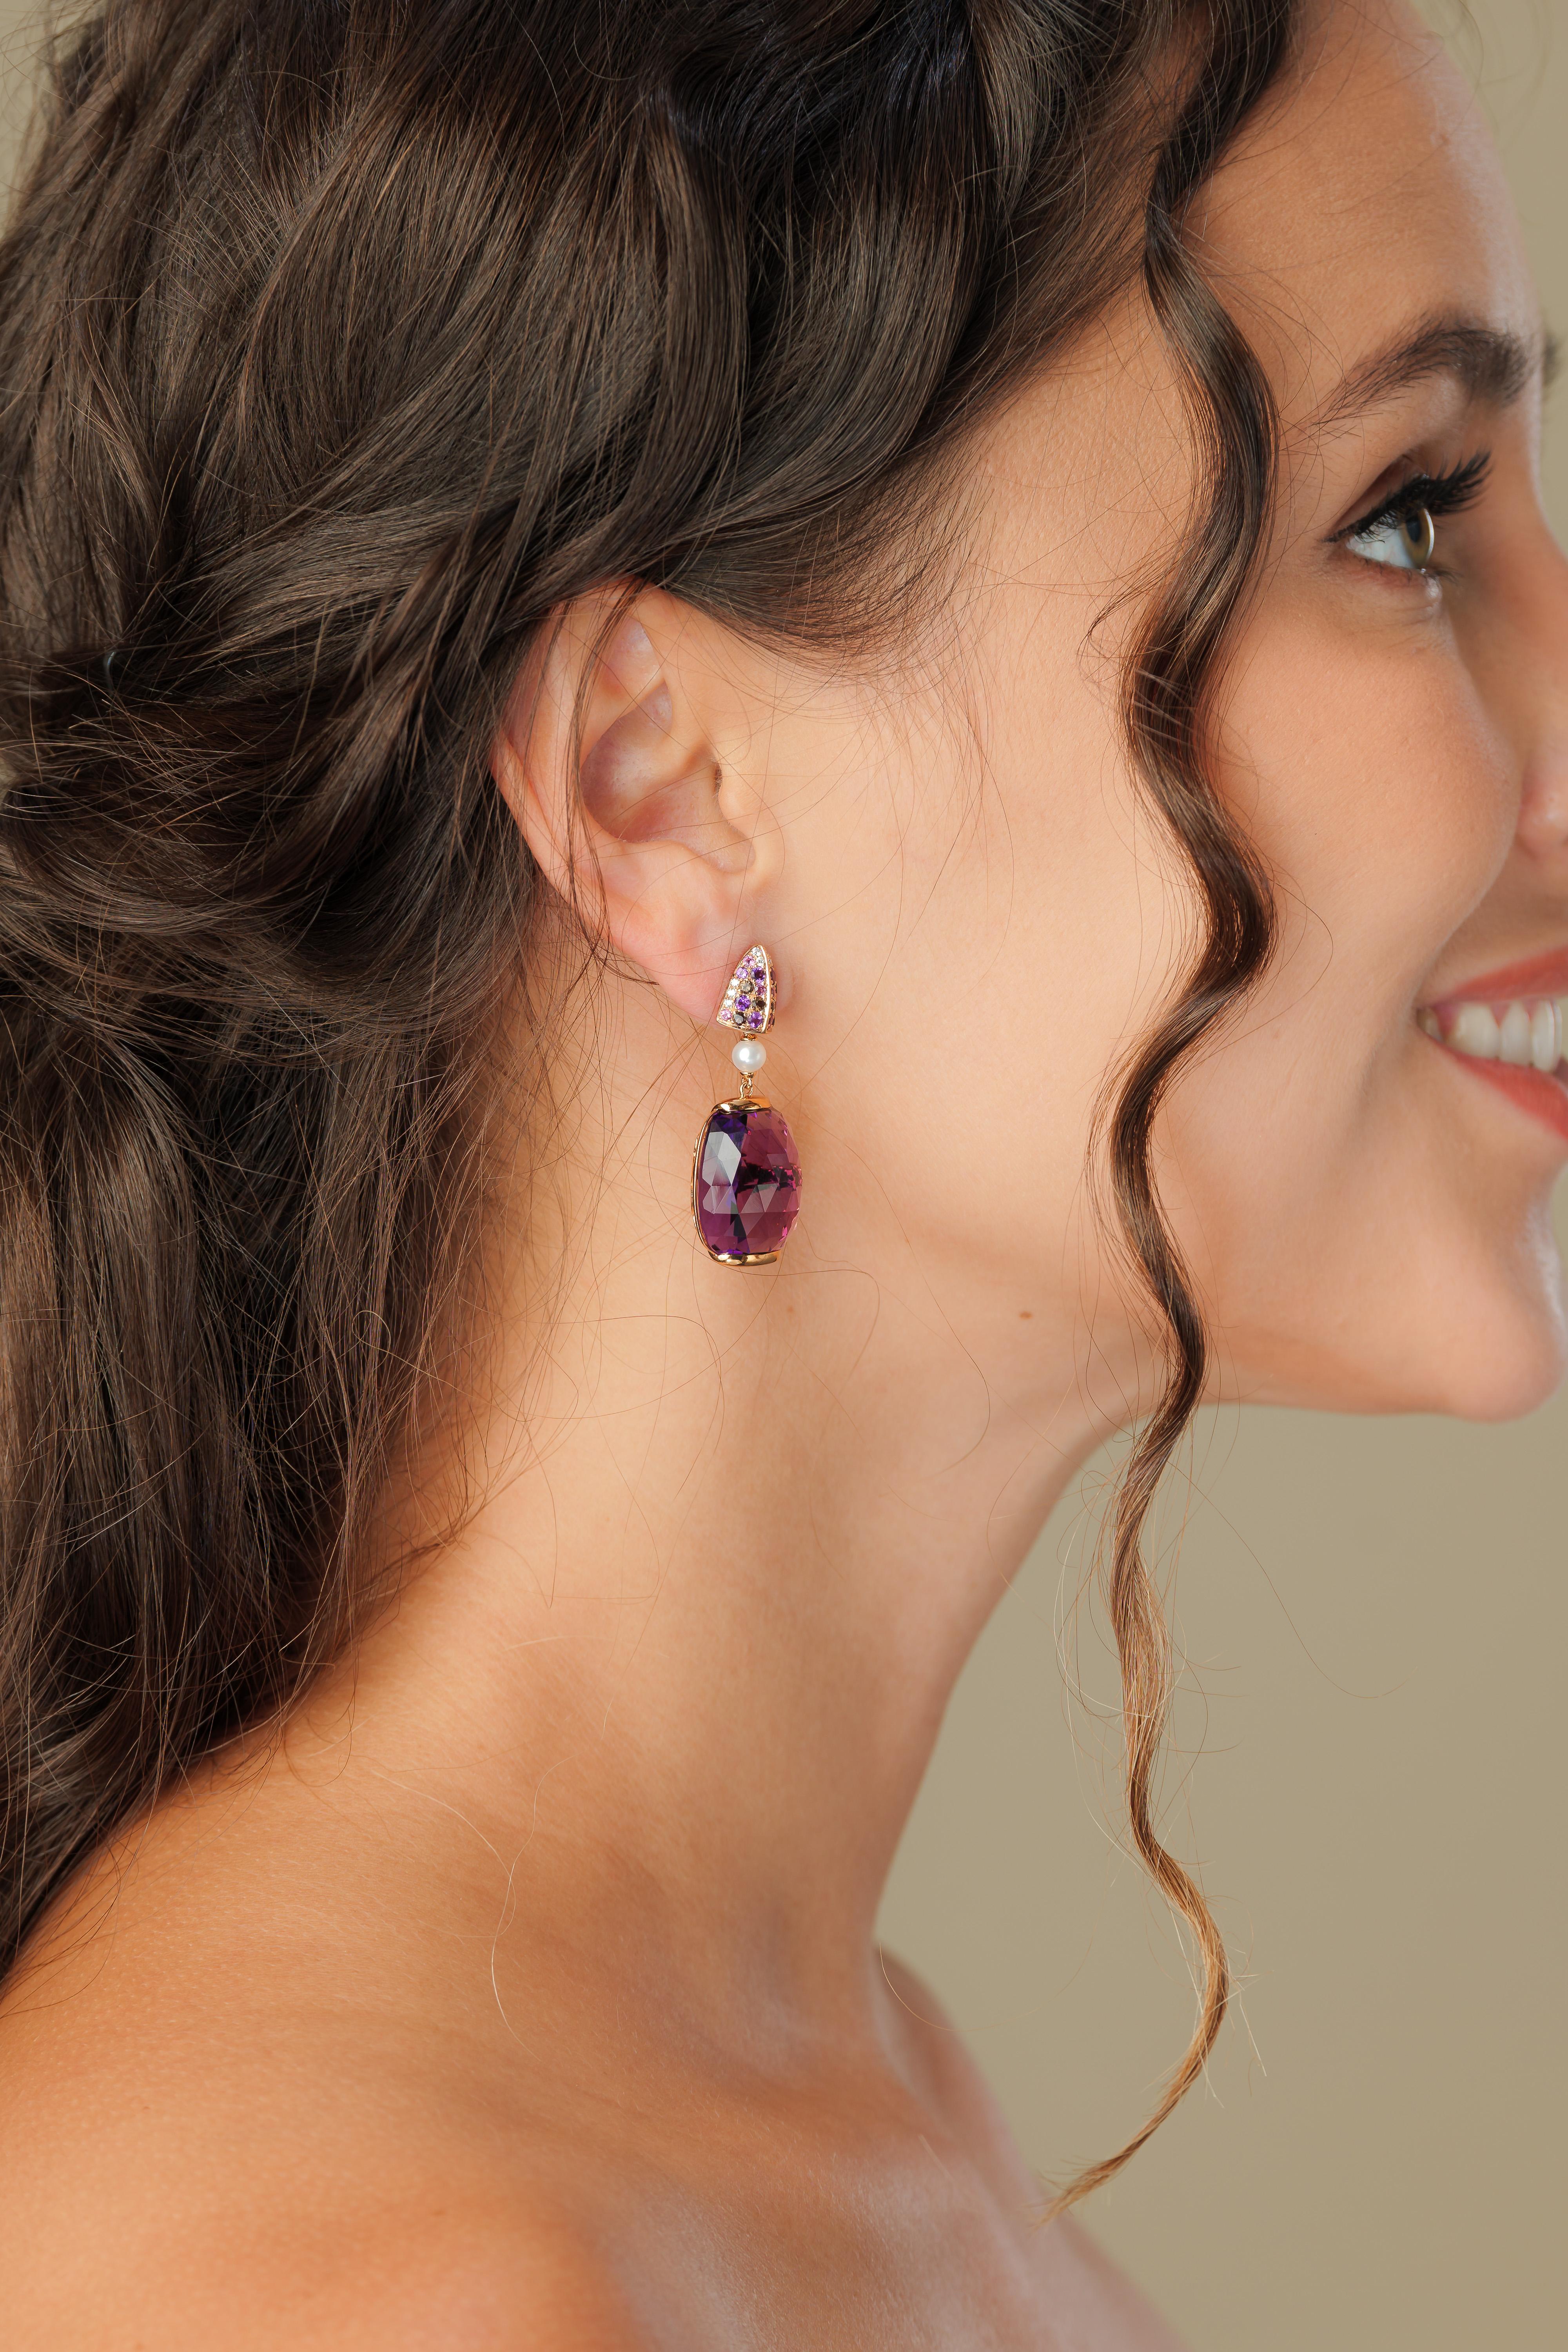 This is an bold and alluring amethyst in a fancy cut to accentuate the beauty of the gemstones. The pop of color with a trendy design makes these an eye-catching pair of earrings. 

Designer Amethyst Earrings with Gemstones, Pearl & Diamond in 18